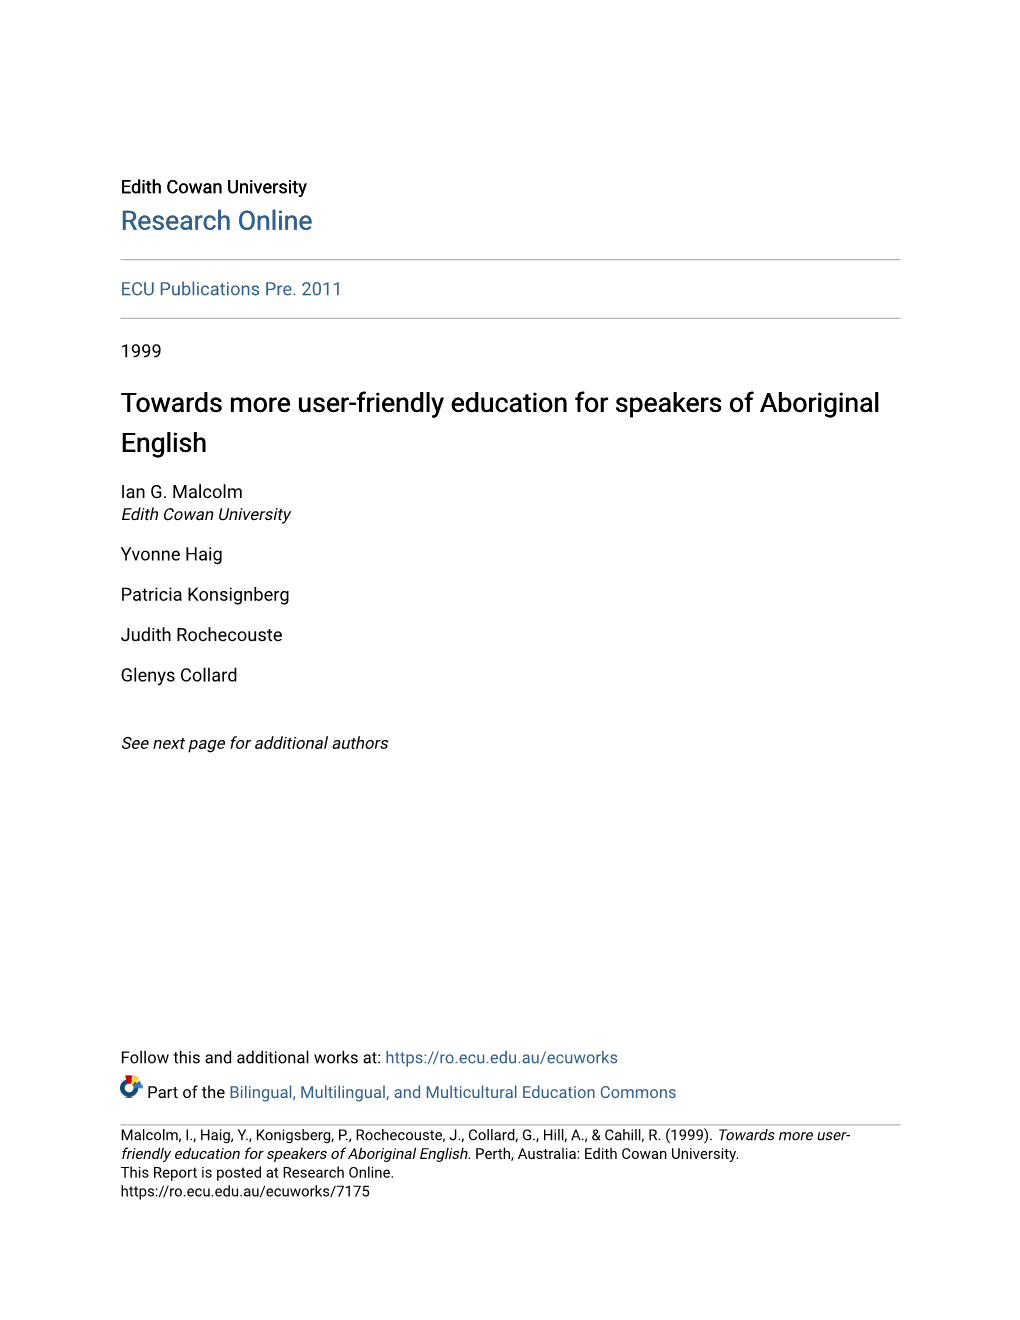 Towards More User-Friendly Education for Speakers of Aboriginal English